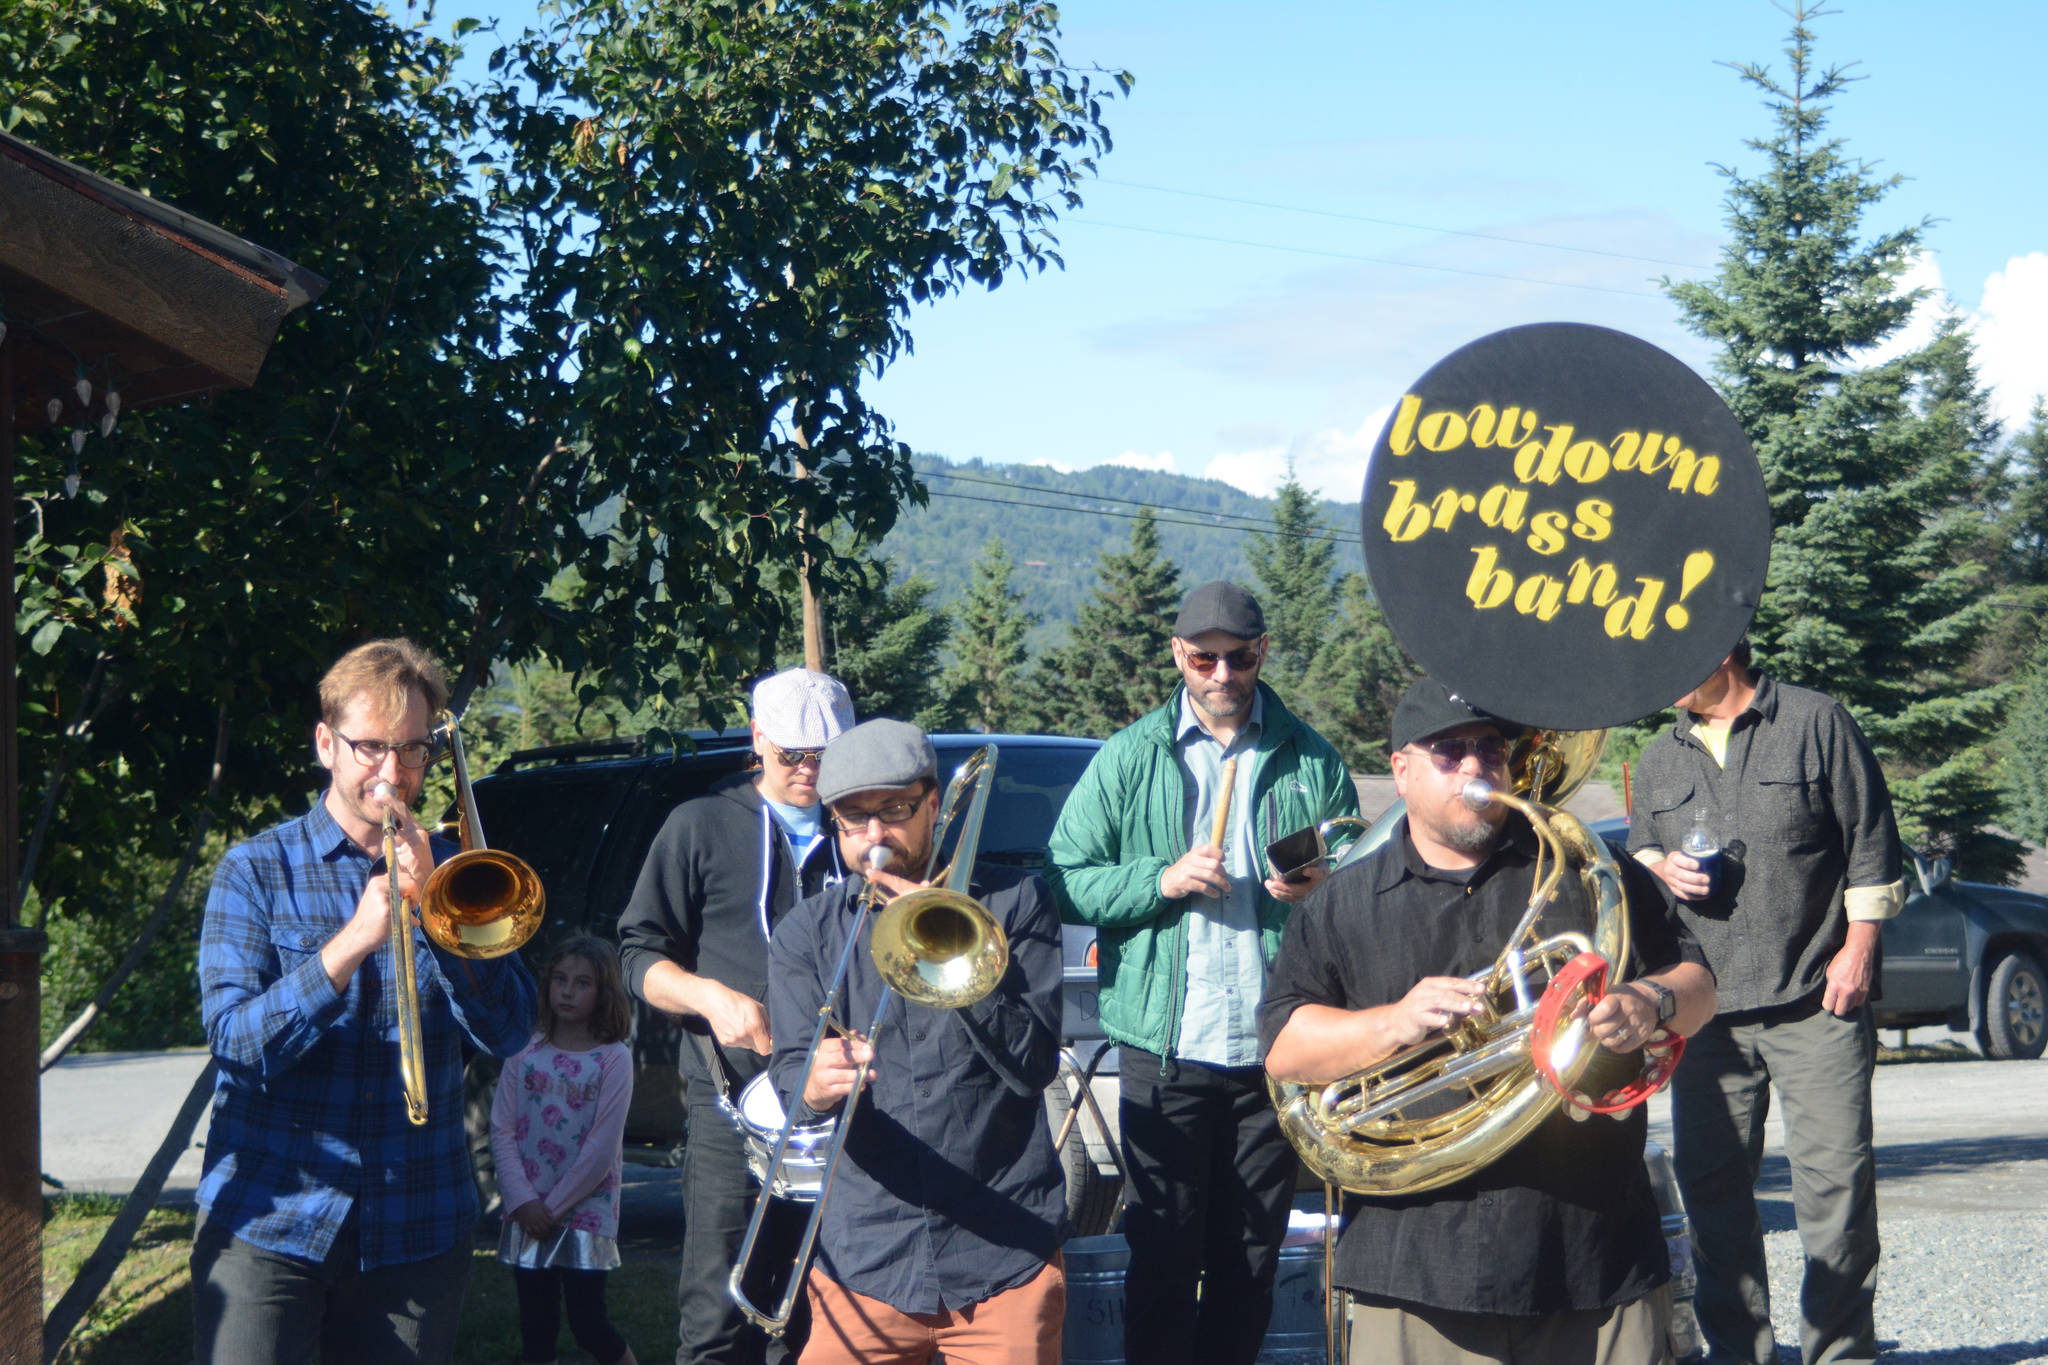 Members of the LowDown Brass Band perform an impromptu session Tuesday Aug. 7, 2018 at the Homer Brewery in Homer, Alaska. The band played at Salmonfest on Saturday, at Alice’s Champagne Palace on Tuesday and at Soldotna Creek Park on Wednesday. (Photo by Michael Armstrong/Homer News)